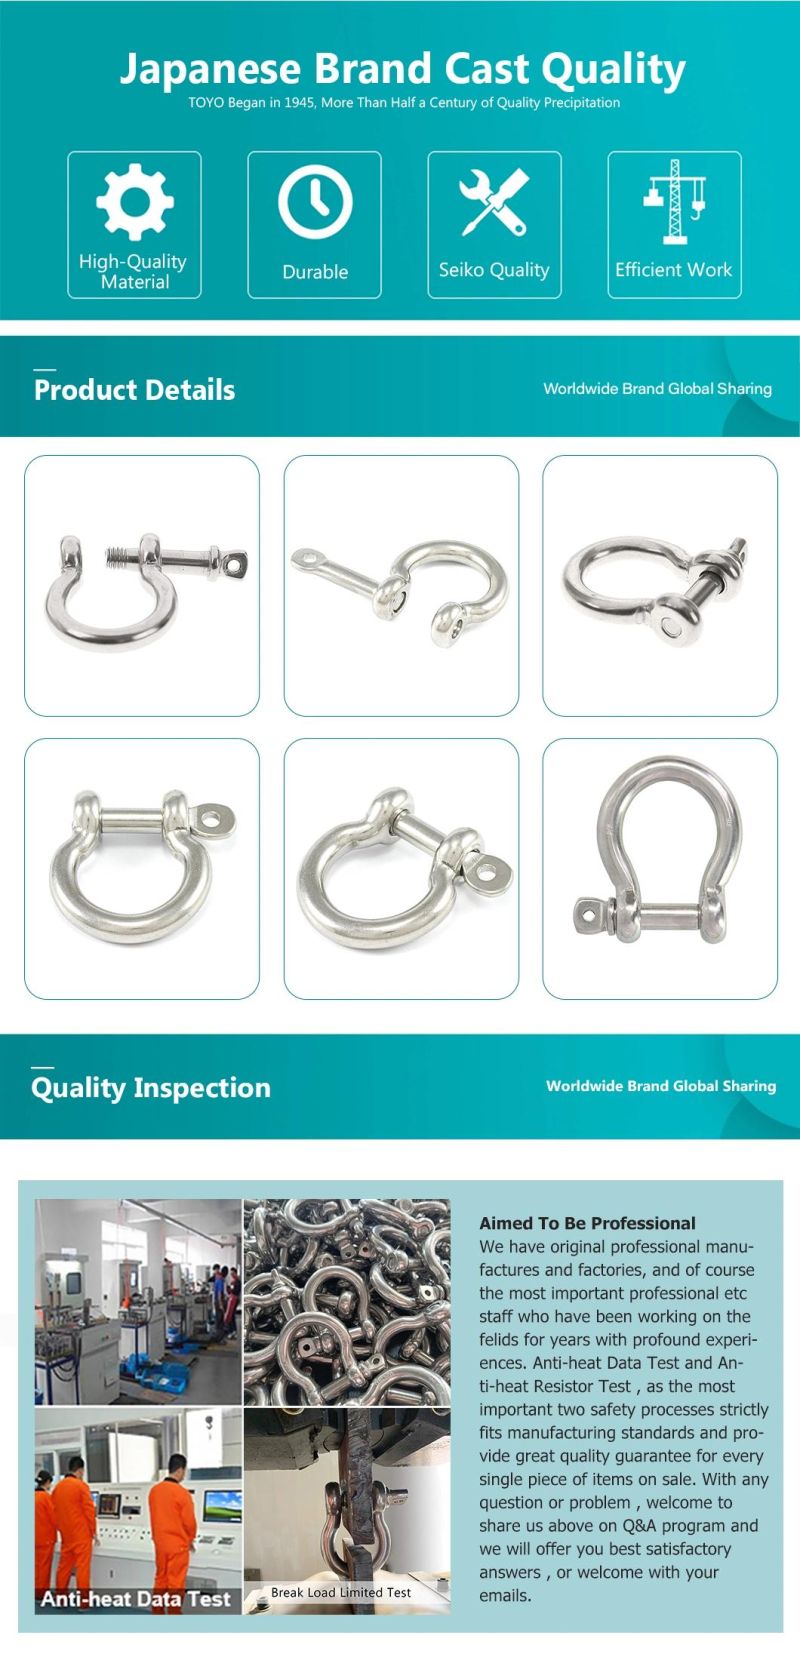 High Strength Bow Shape Stainless Steel Anchor Clevis Omega Bow Shackle